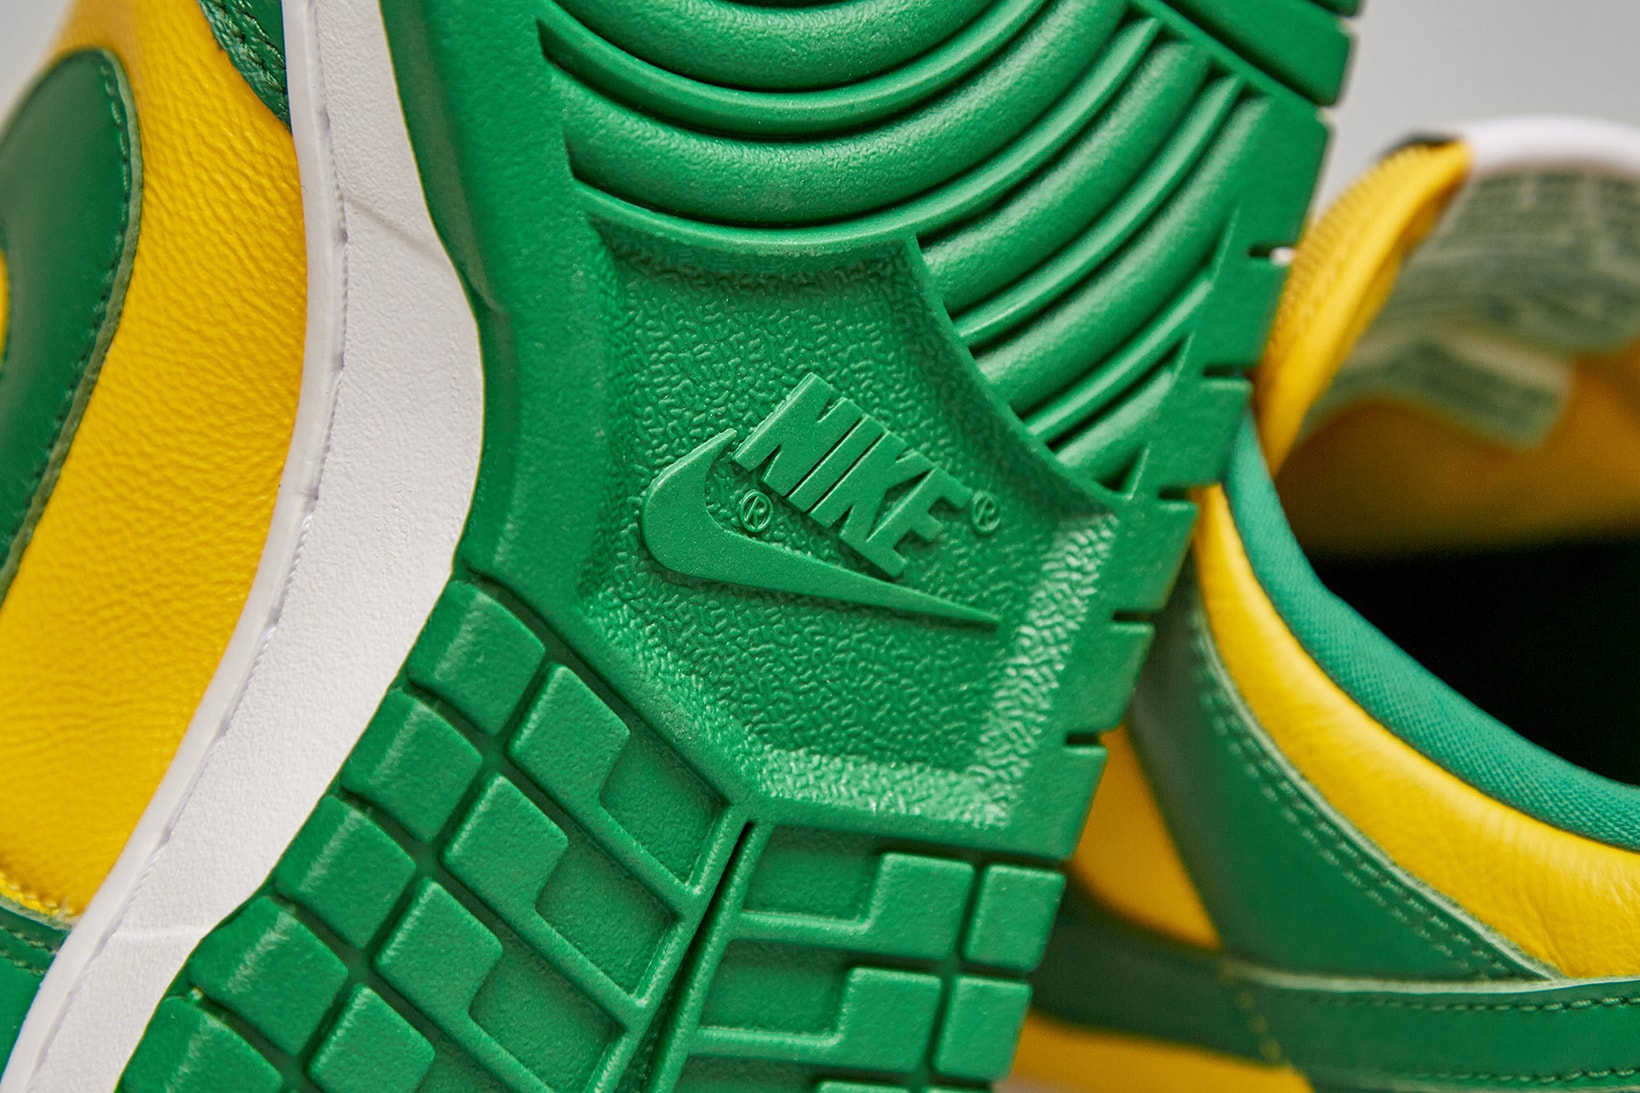 Nike Dunk Low “Brazil” Officially Revealed